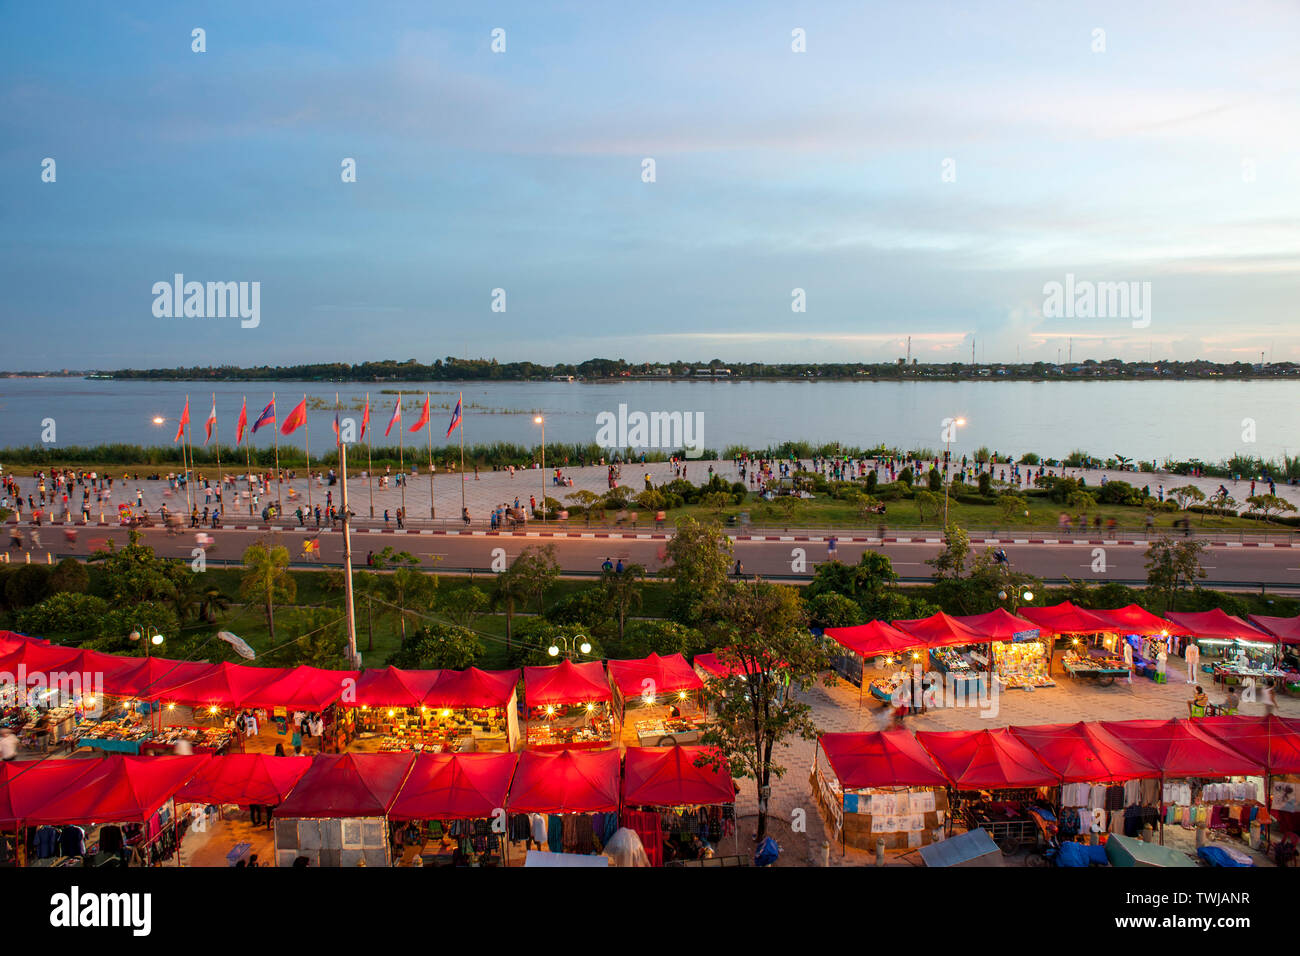 View over the night market and Mekong river at the waterfront in Vientiane, Laos. Stock Photo